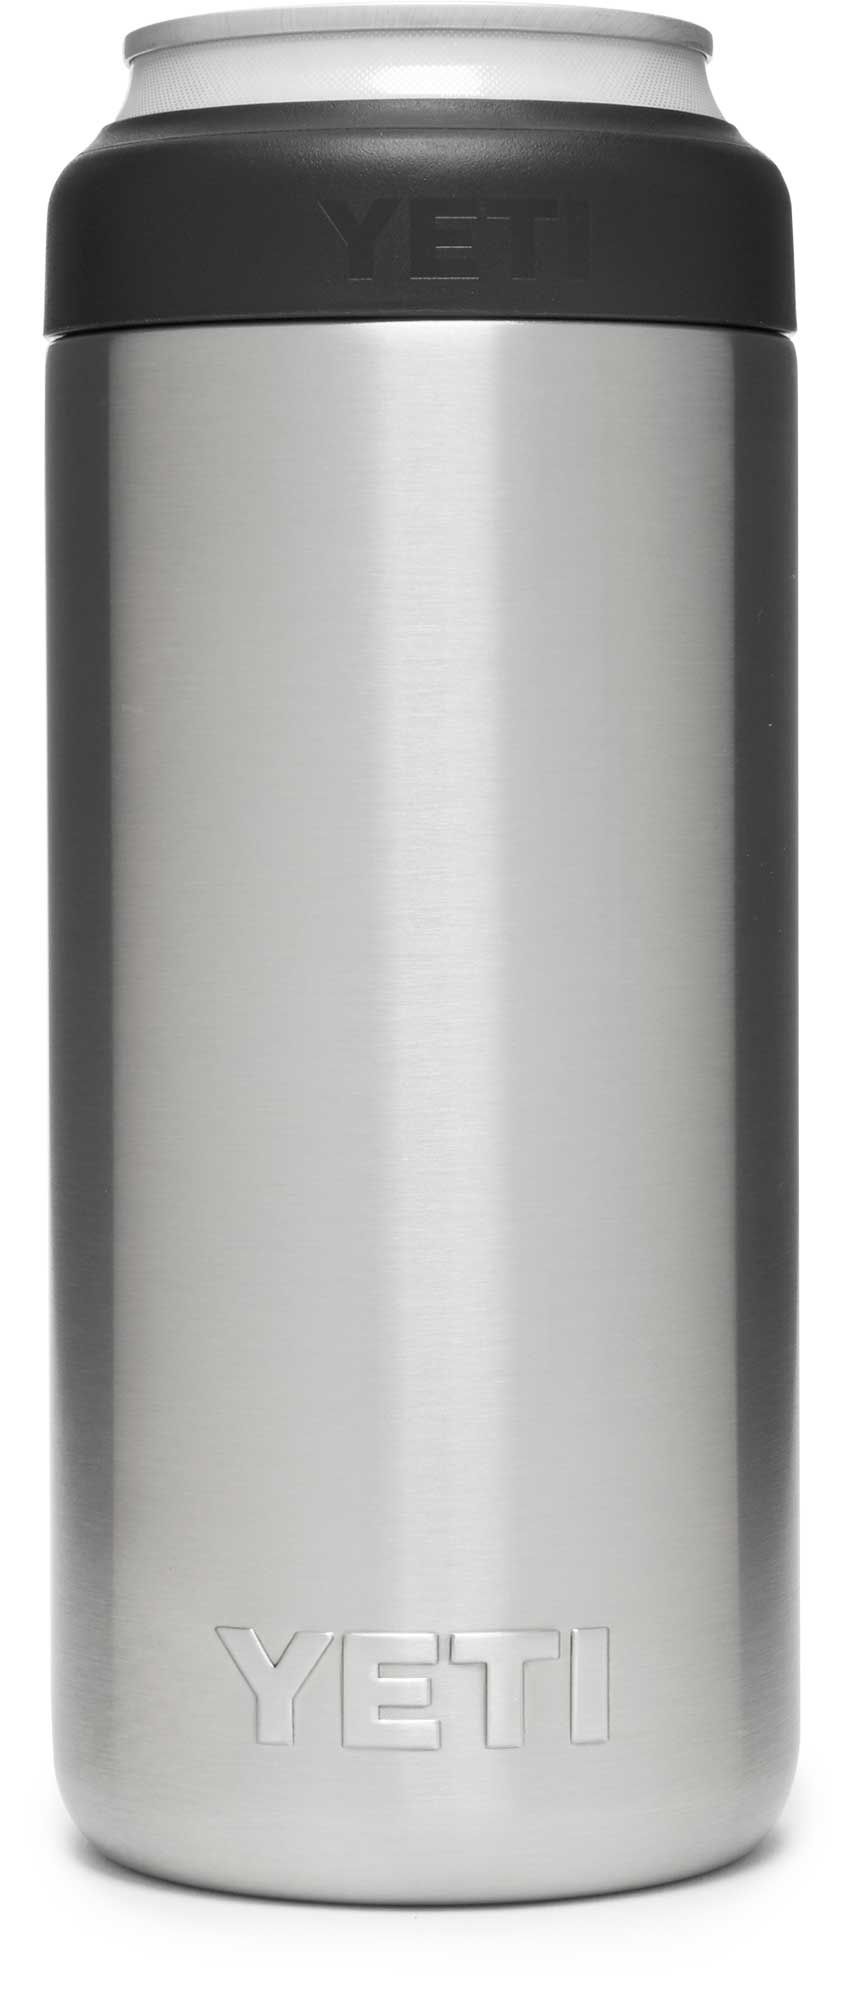 Photos - Other Accessories Yeti 12 oz. Rambler Colster Slim Can Insulator, Stainless 20YETUCLSTRSLMCN 